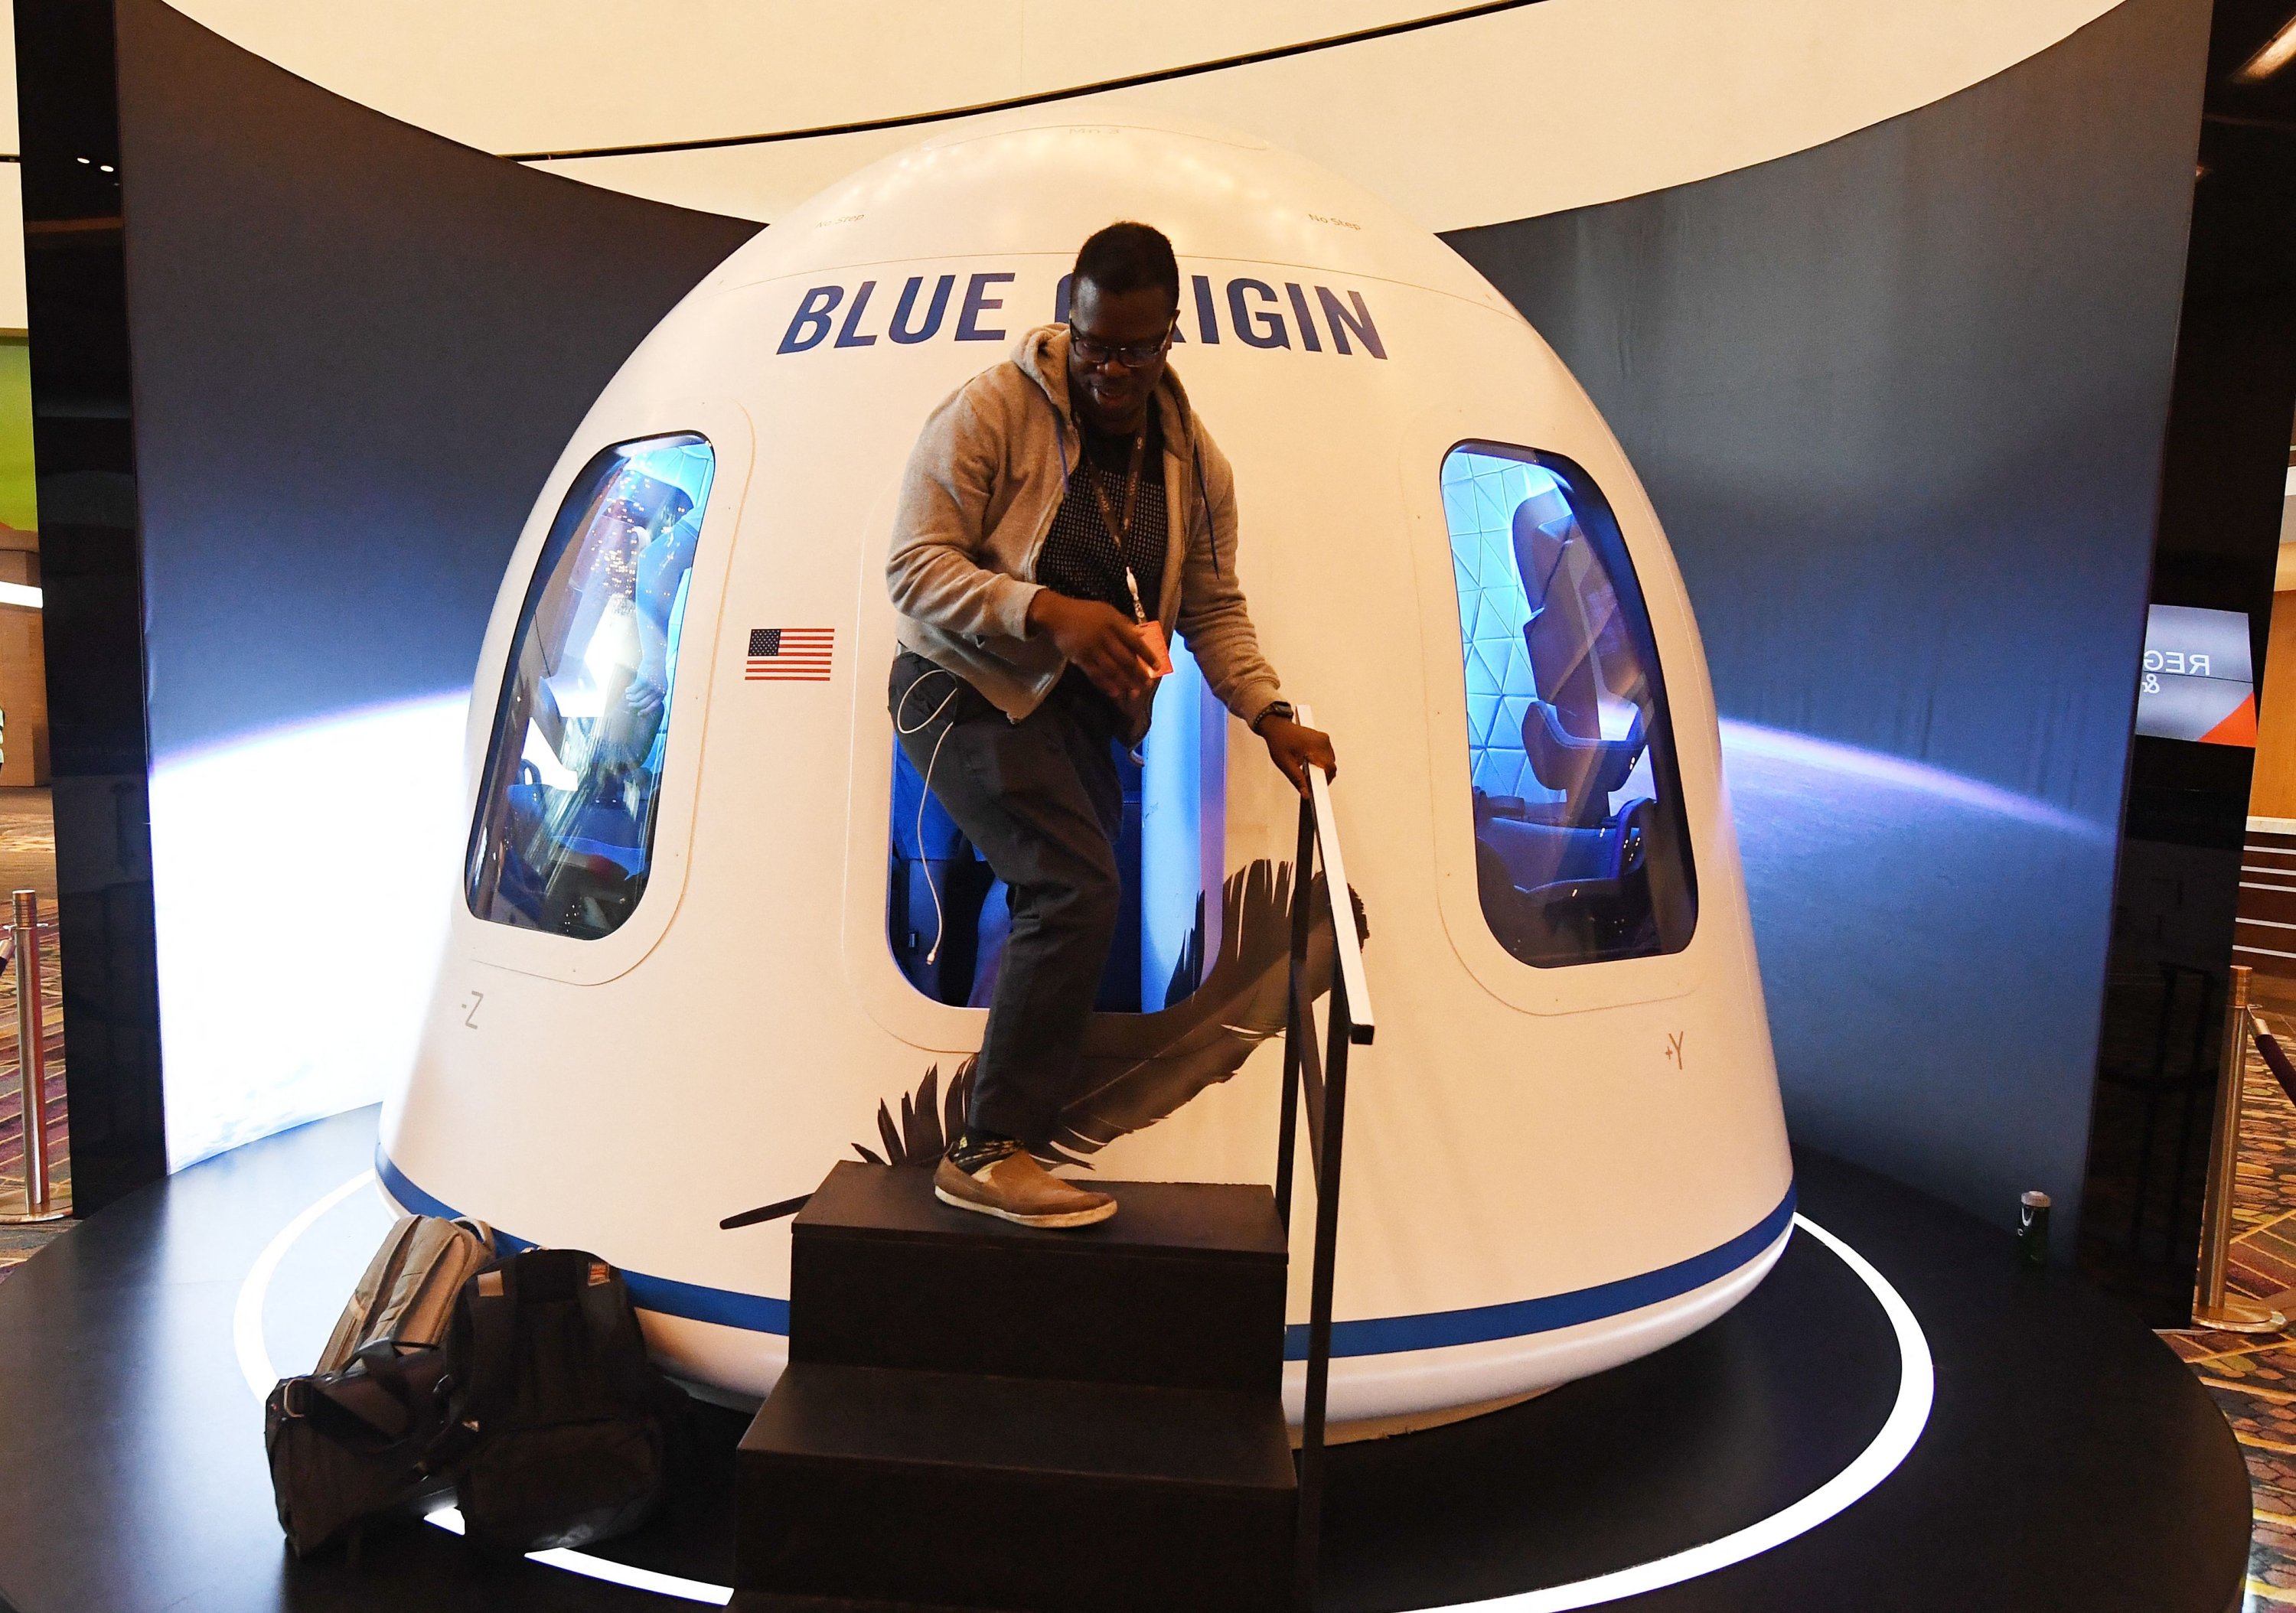 A participant exits the Blue Origin Space Simulator during the Amazon Re:MARS conference on robotics and artificial intelligence at the Aria Hotel in Las Vegas, Nevada, June 05, 2019. (AFP)